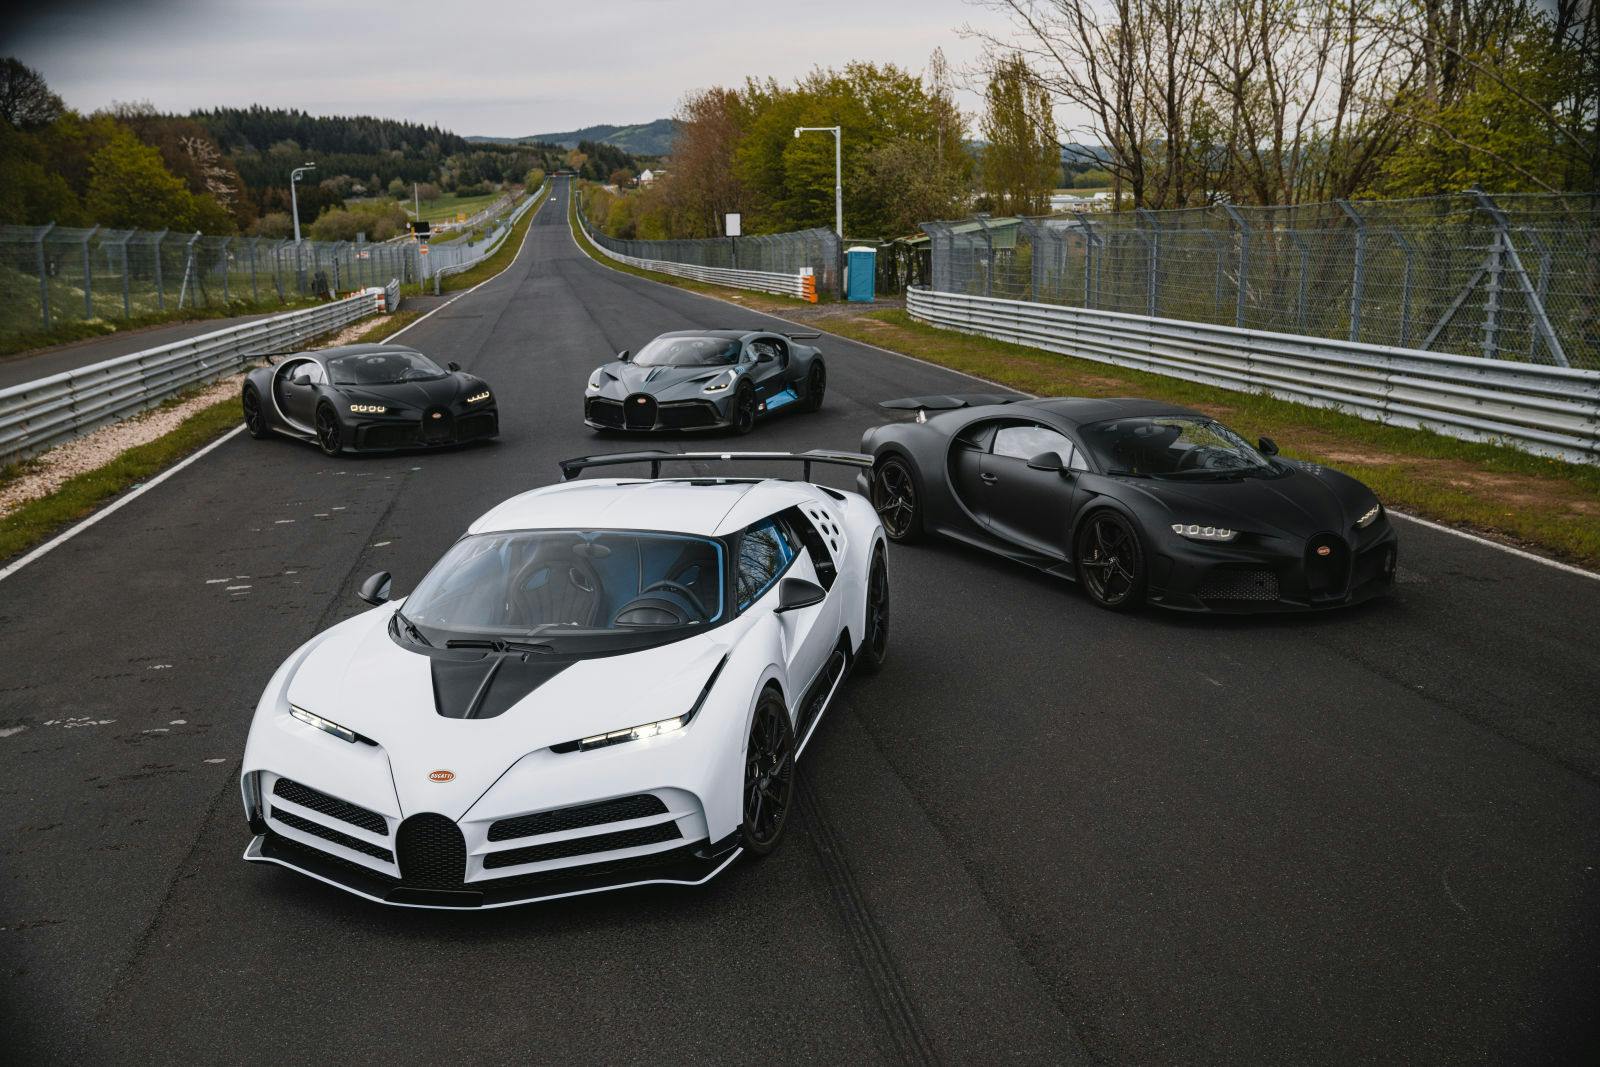 Bugatti takes the world’s most exclusive development lineup to the Nürburgring.